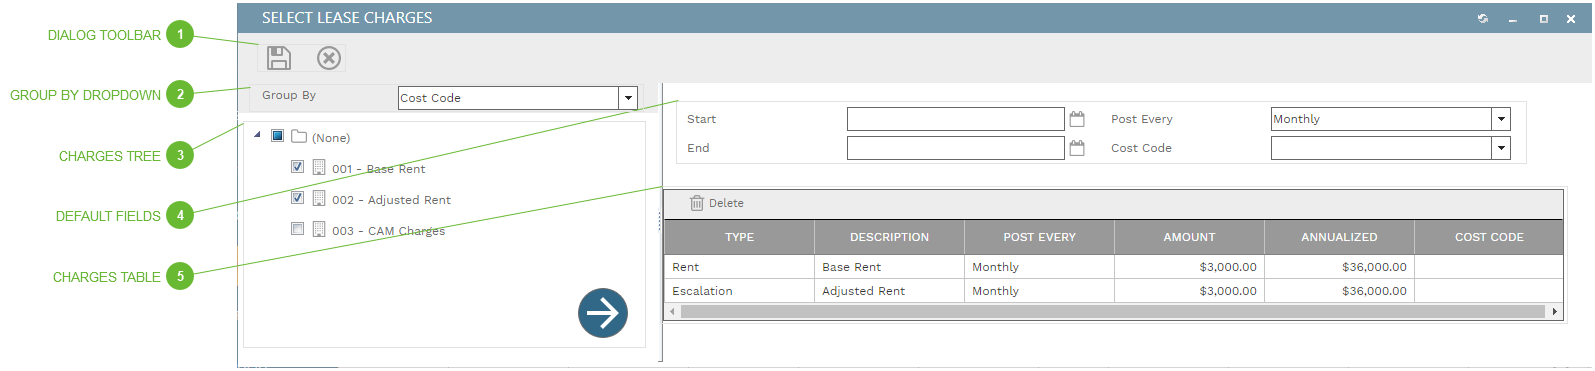 Select Lease Charges Dialog